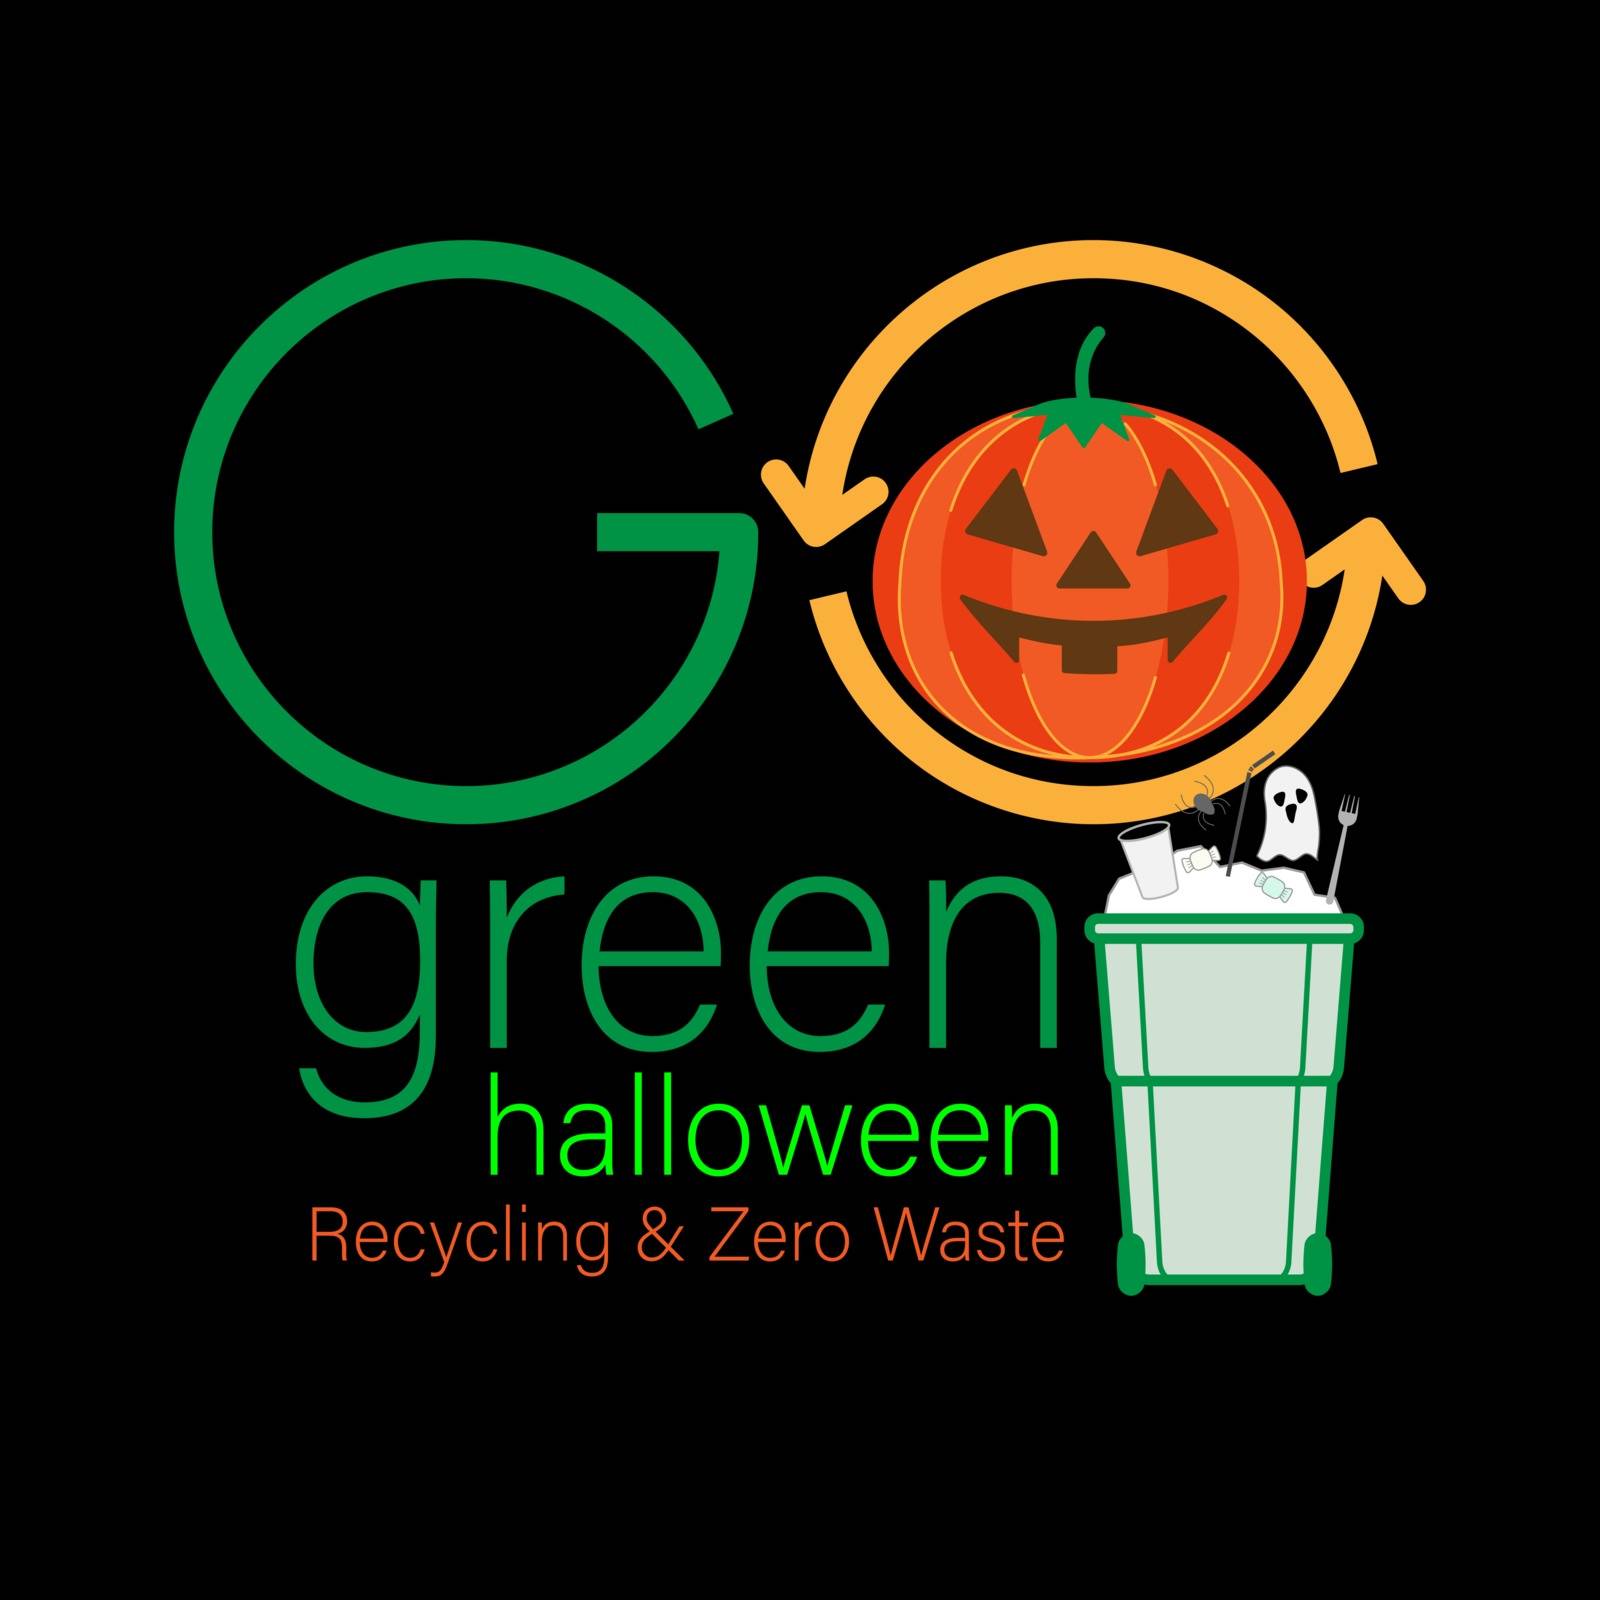 Go green halloween typographic design. Finding way to reduce waste by recycling. Celebrate in sustainable style. Vector illustration outline flat design style.